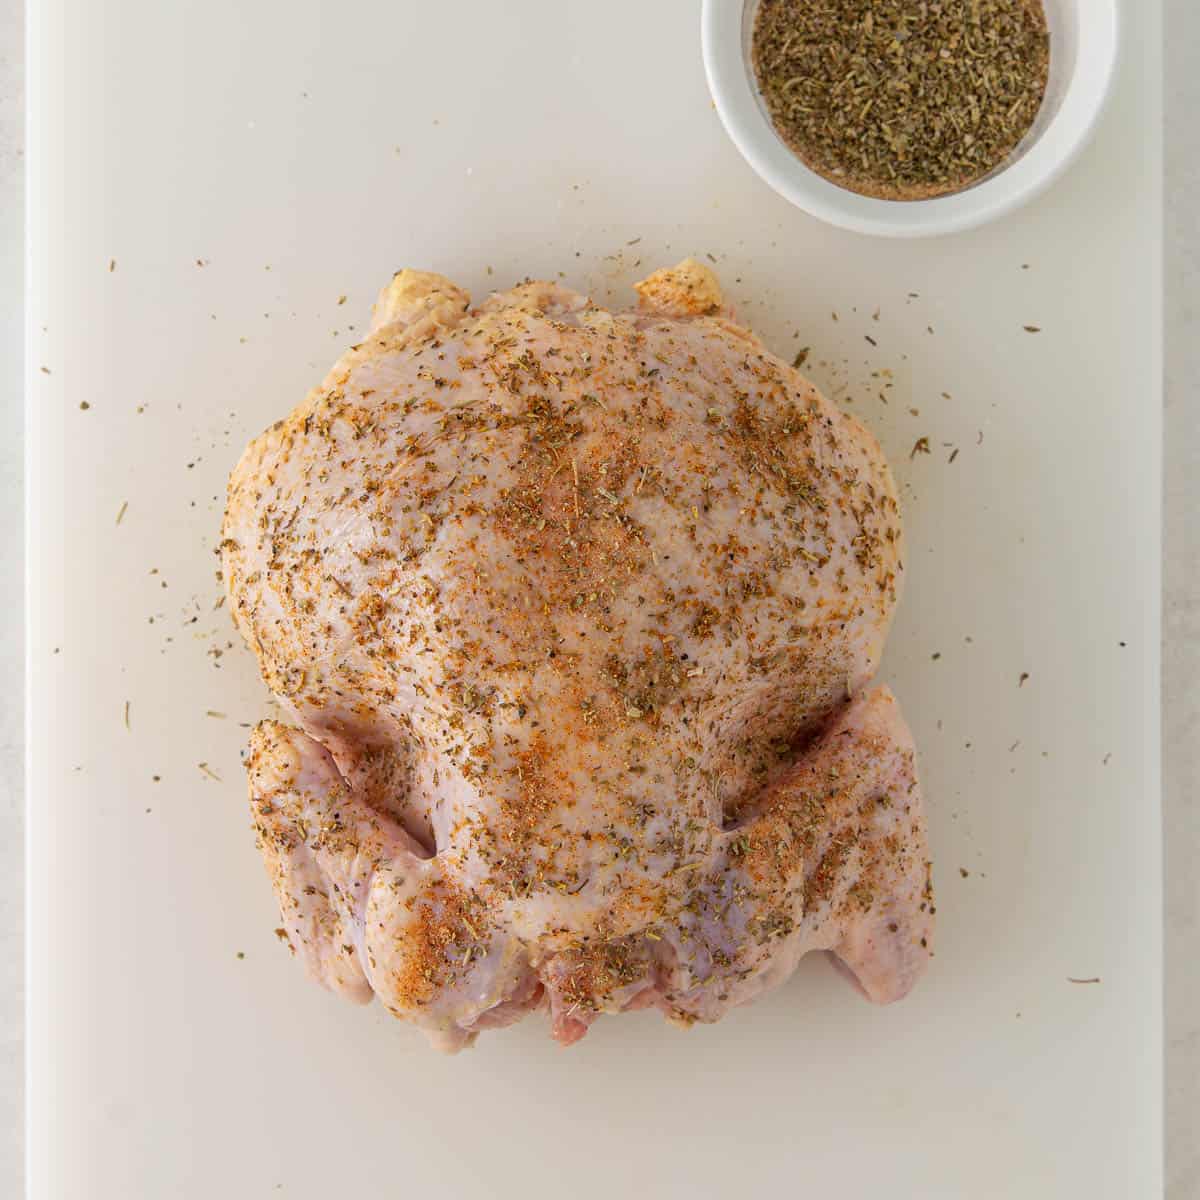 A whole raw chicken that has been coated in olive oil and seasonings before being cooked in an air fryer.